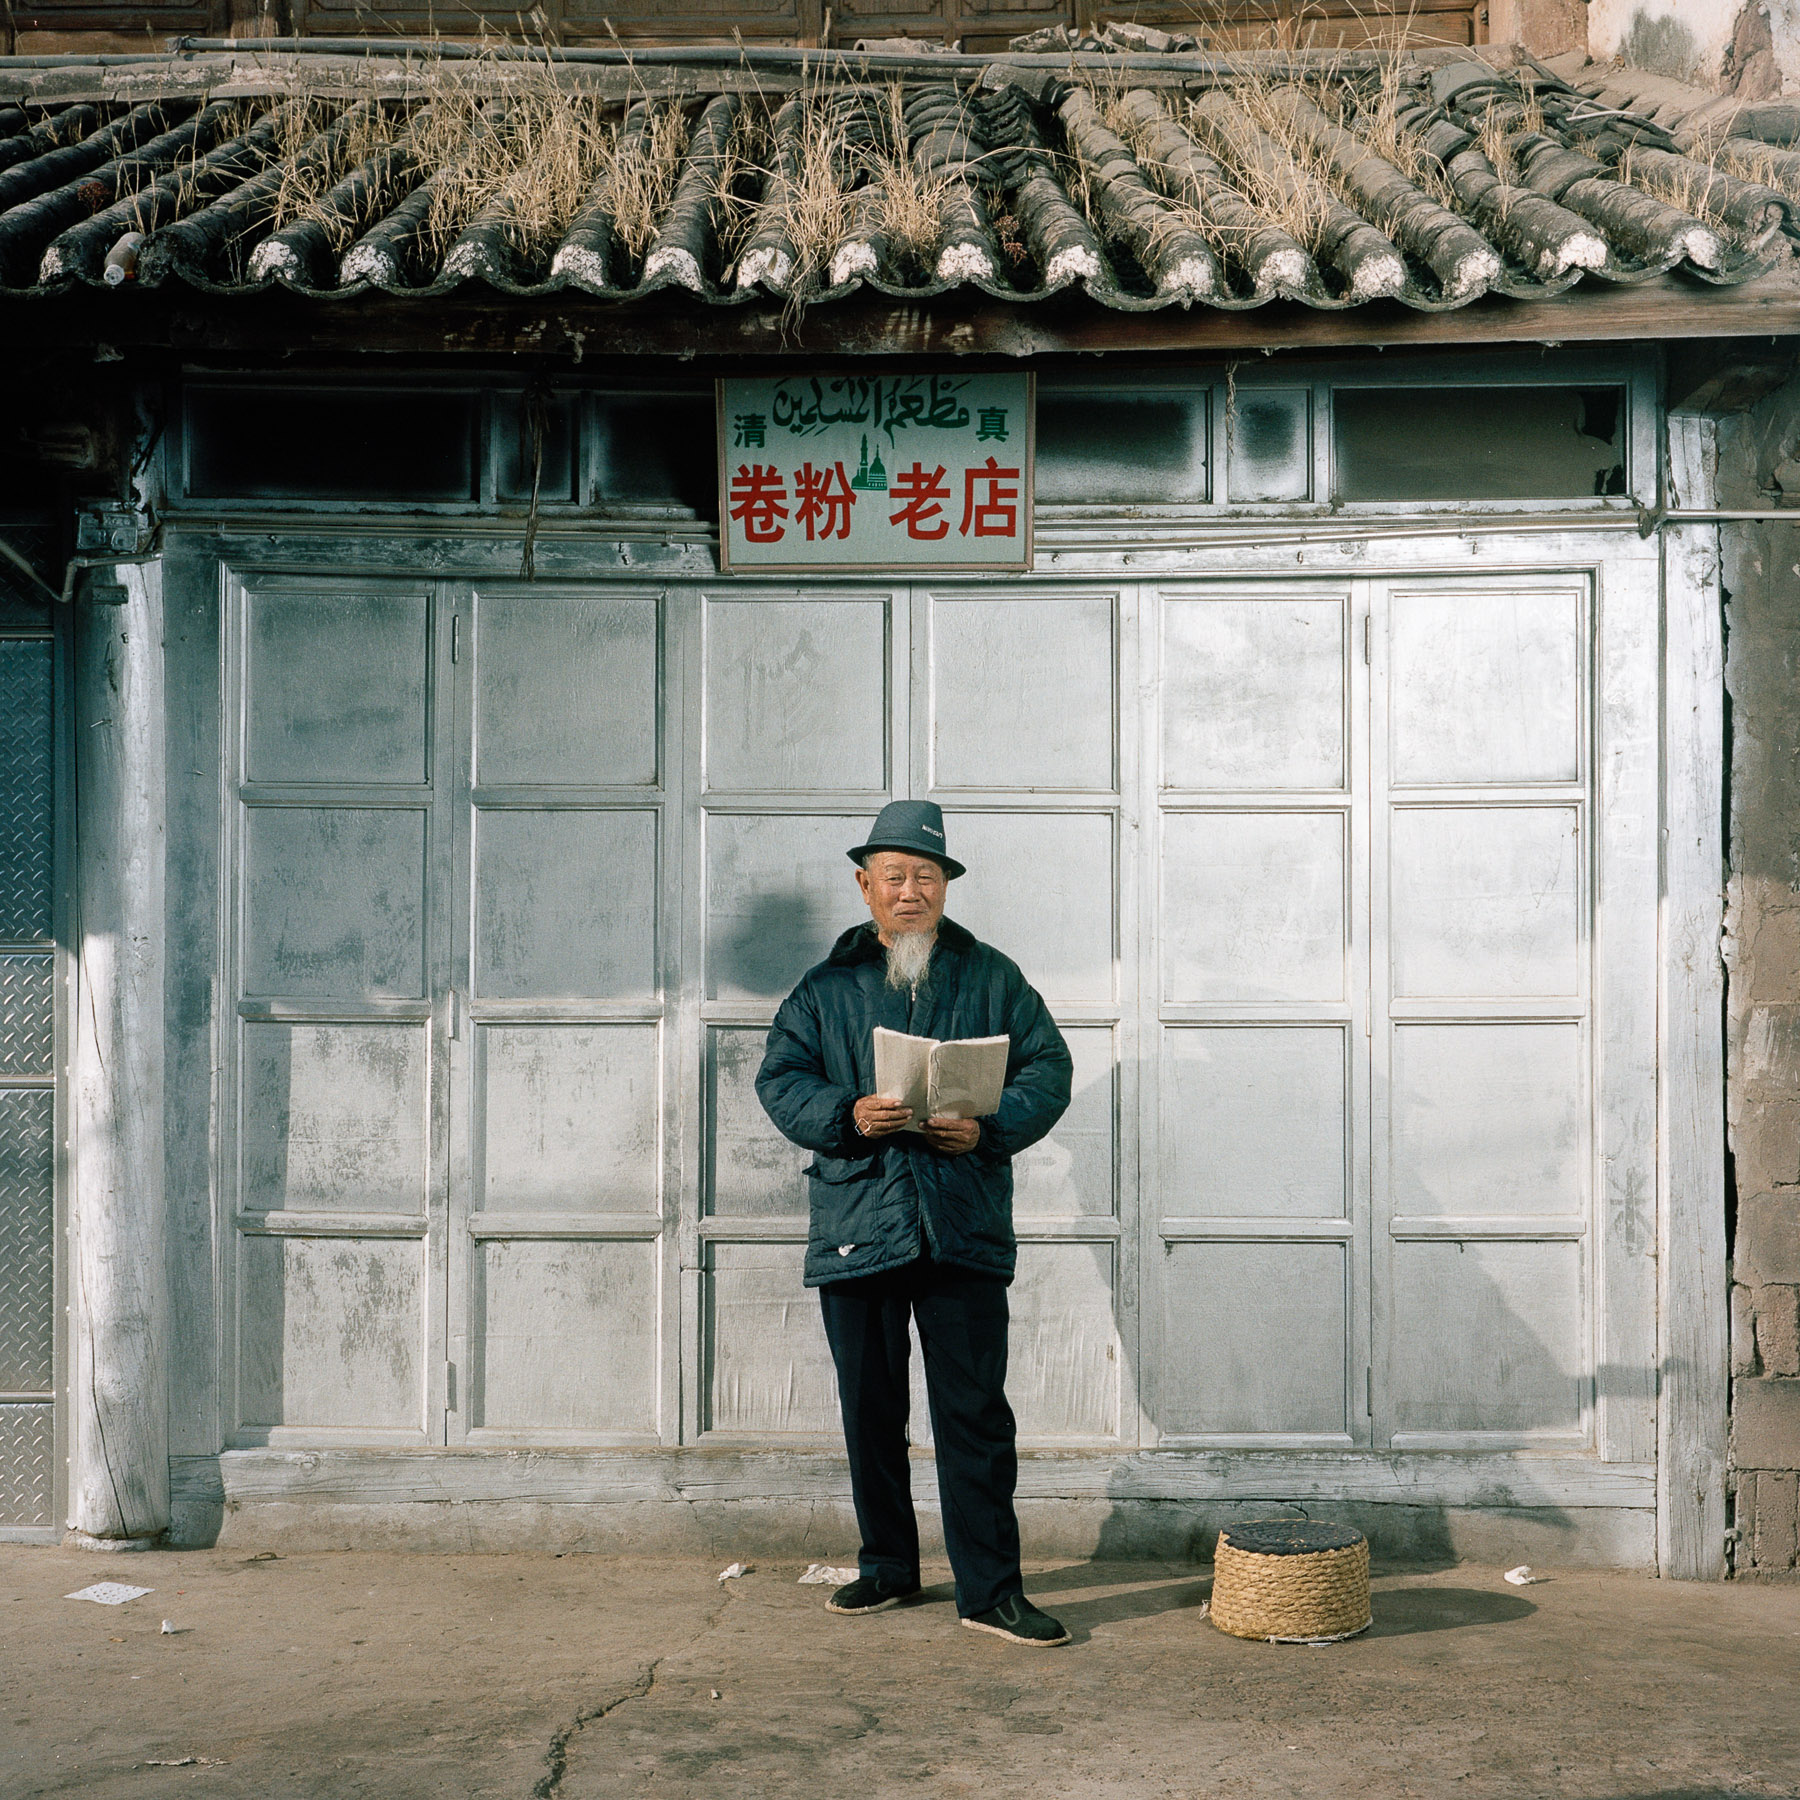  China, Yunnan province. November 29th 2013. Fan Wei Guo is a 73-year old farmer of the Hui minority. He was doing calligraphy when I found him in the street of his village. 